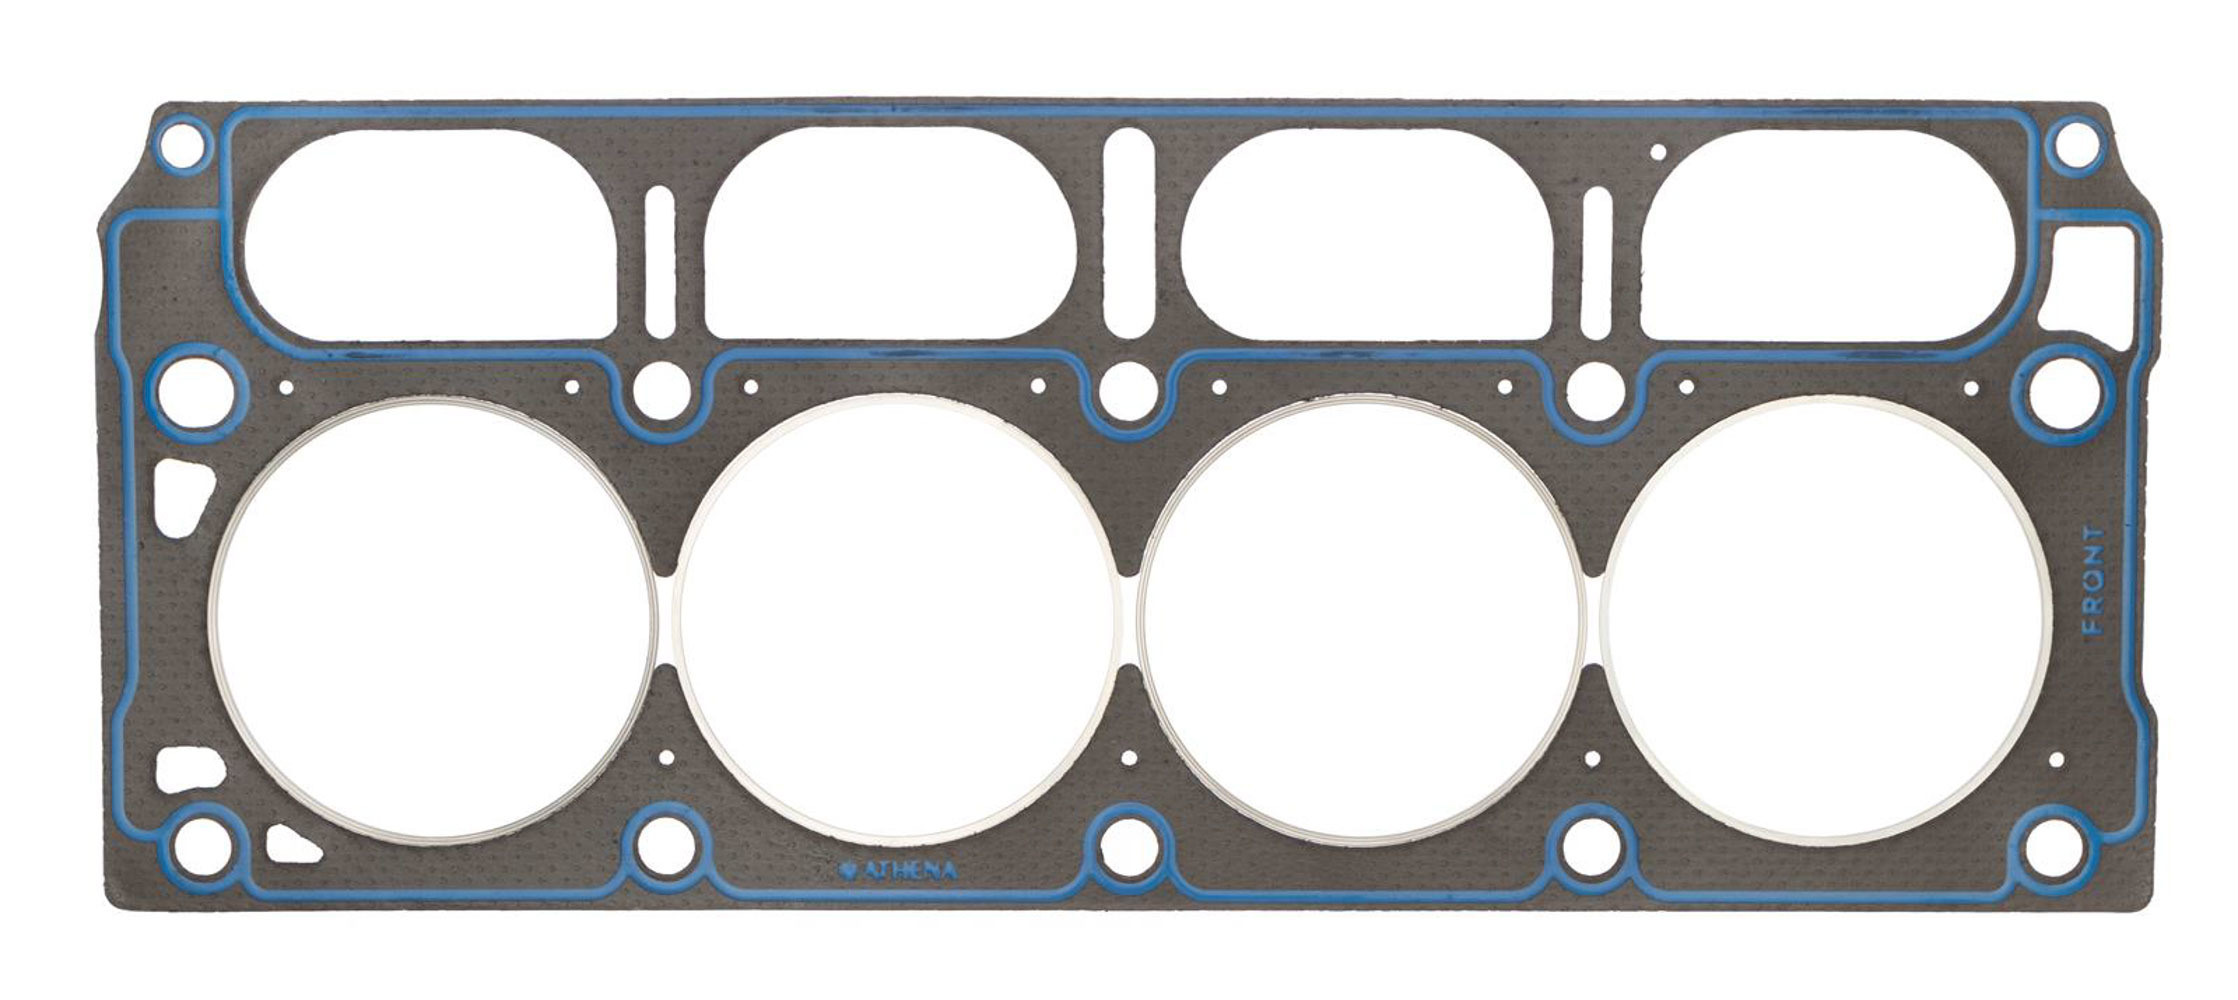 SCE Gaskets CR272055 - Cylinder Head Gasket, Vulcan Cut Ring, 4.200 in Bore, 0.055 in Compression Thickness, Steel Core Laminate, GM LT-Series, Each